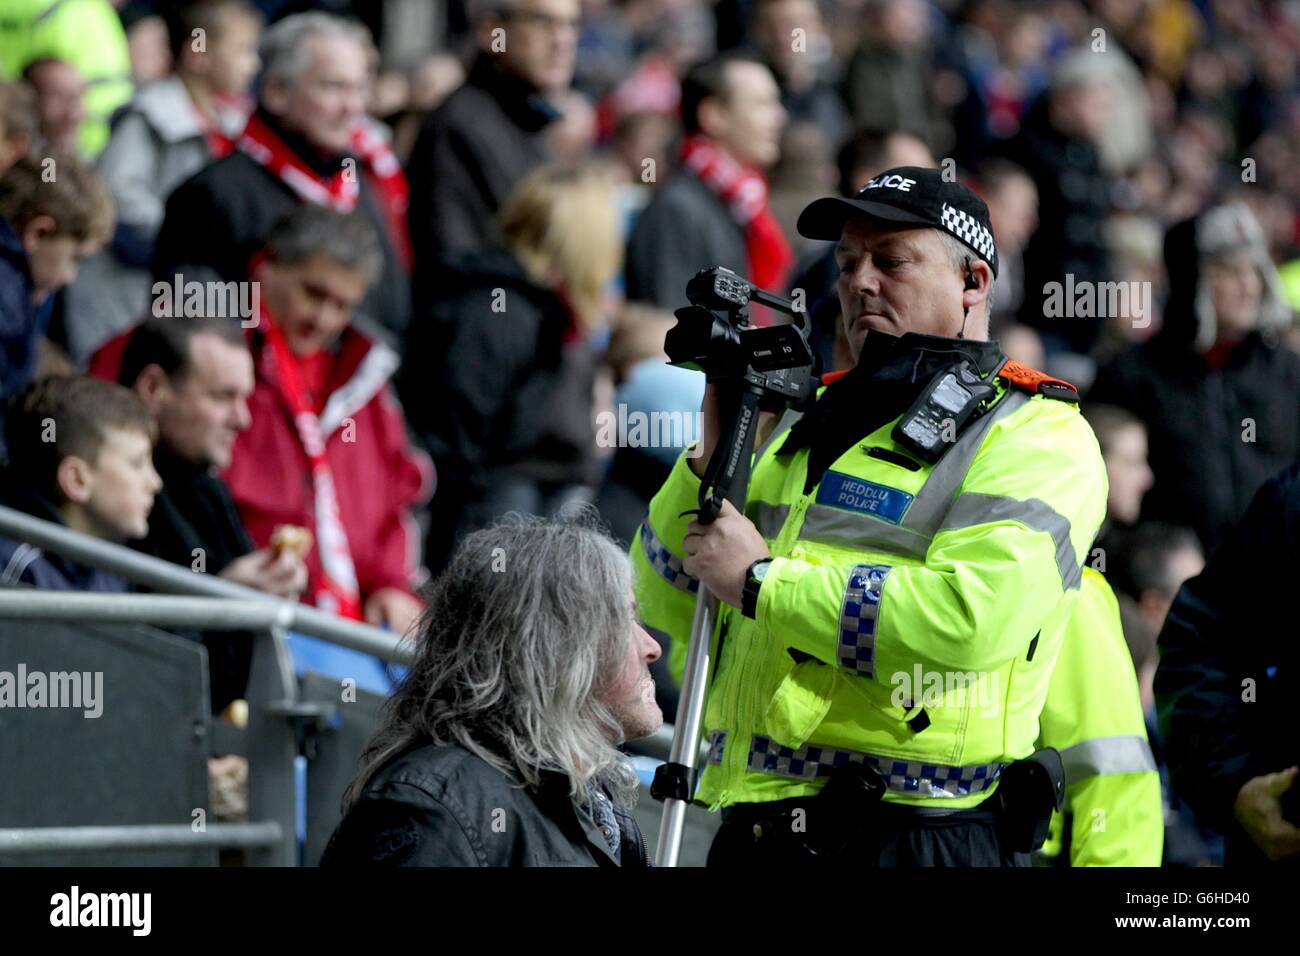 Soccer - Barclays Premier League - Cardiff City v Swansea City - Cardiff City Stadium. A Police Officer films football fans in the stands Stock Photo